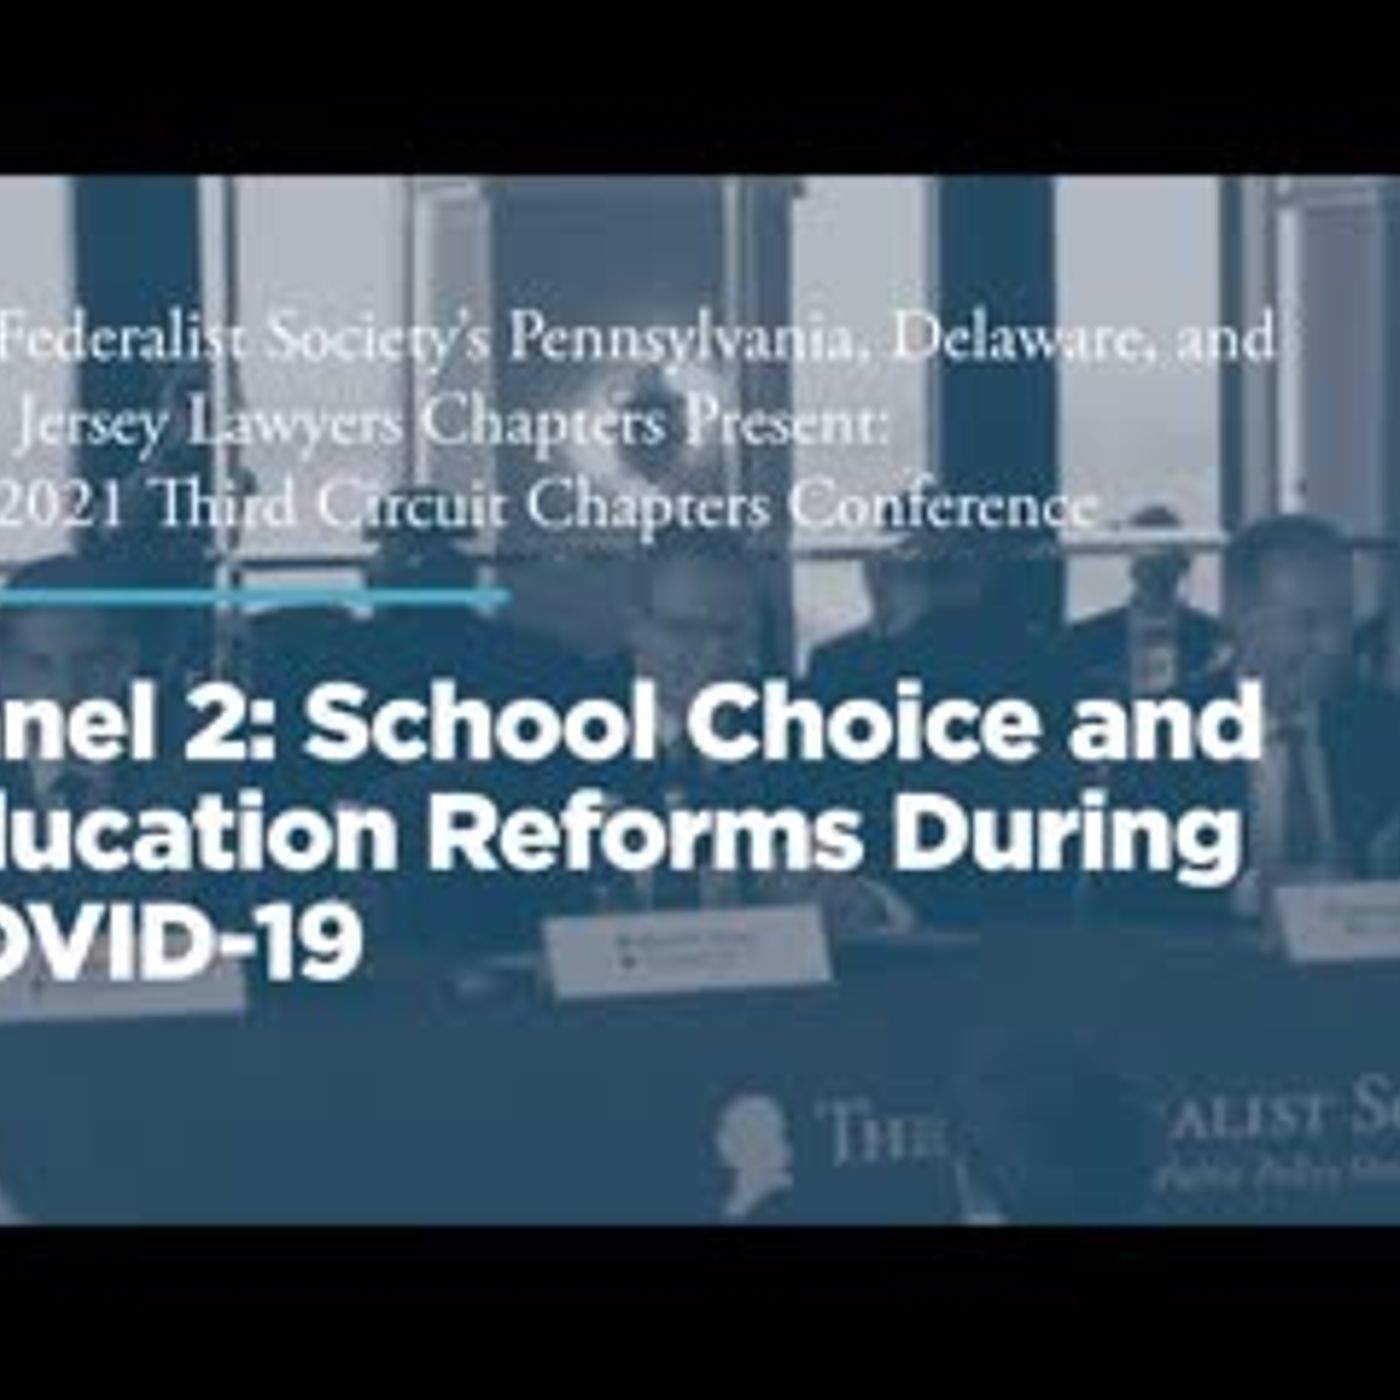 Panel Two: School Choice and Education Reforms During COVID-19